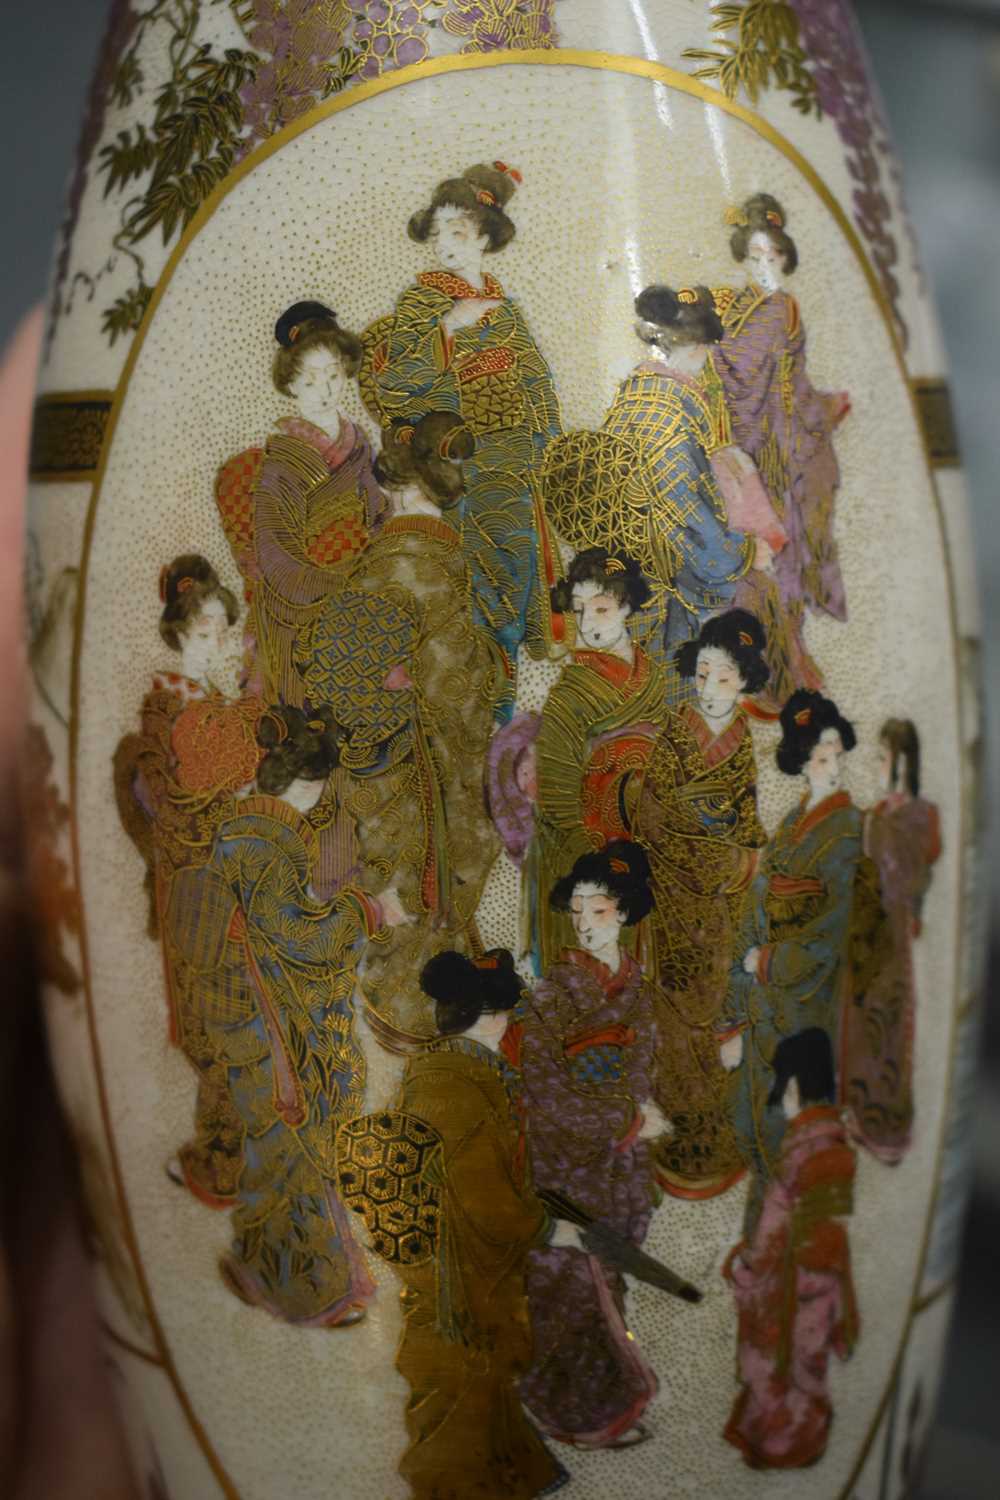 A PAIR OF LATE 19TH CENTURY JAPANESE MEIJI PERIOD SATSUMA POTTERY VASES painted with a group of - Image 17 of 25